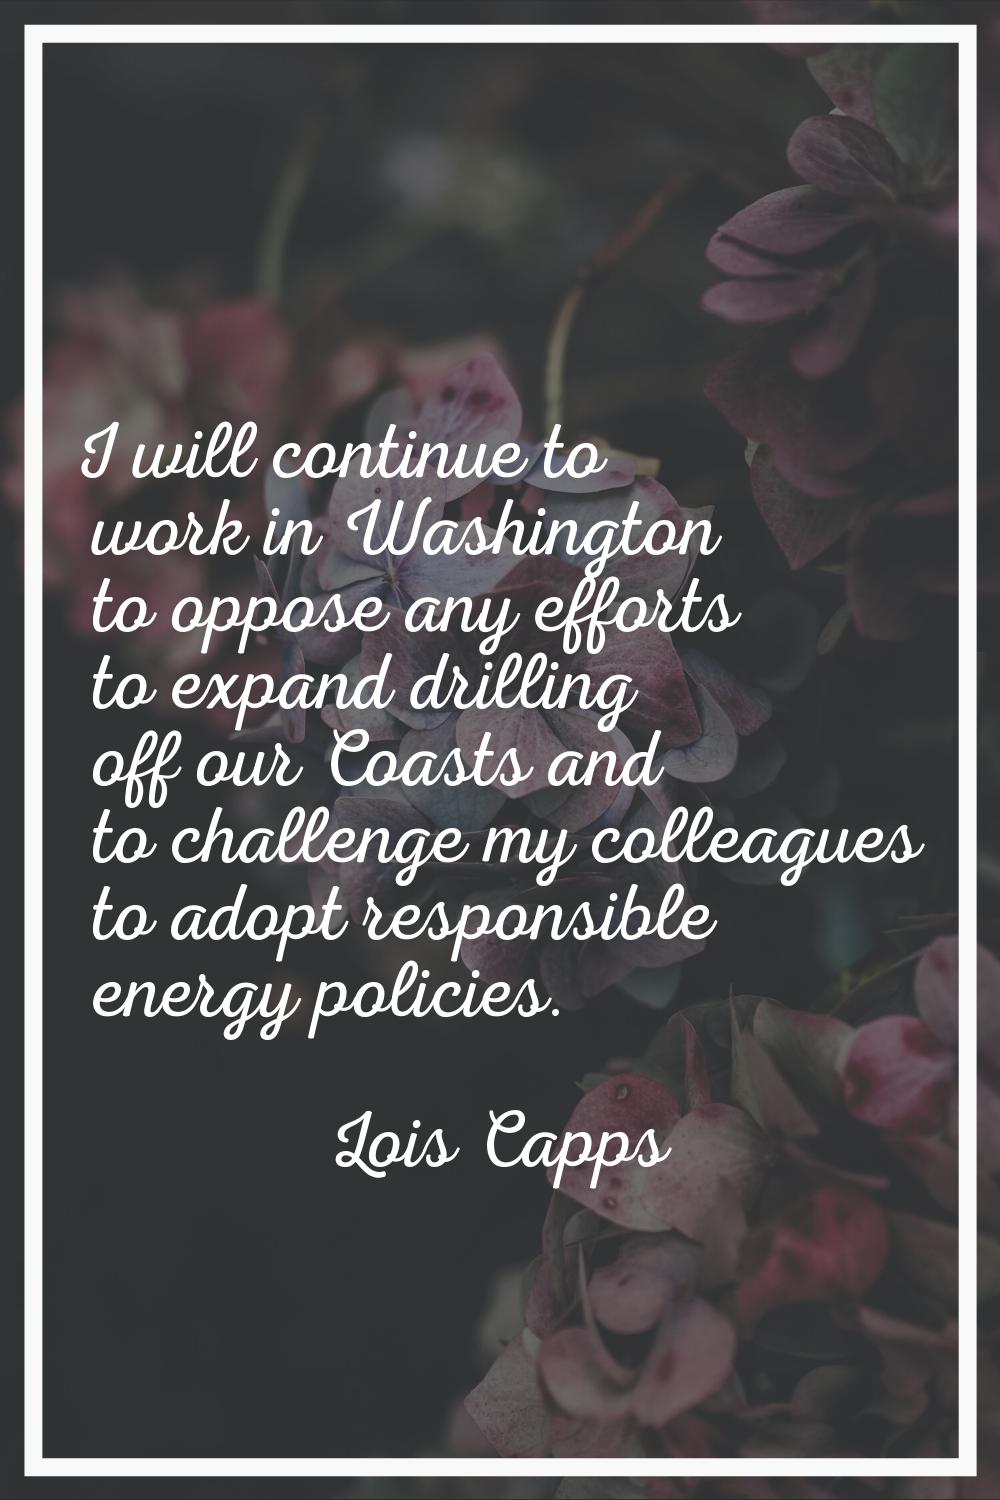 I will continue to work in Washington to oppose any efforts to expand drilling off our Coasts and t